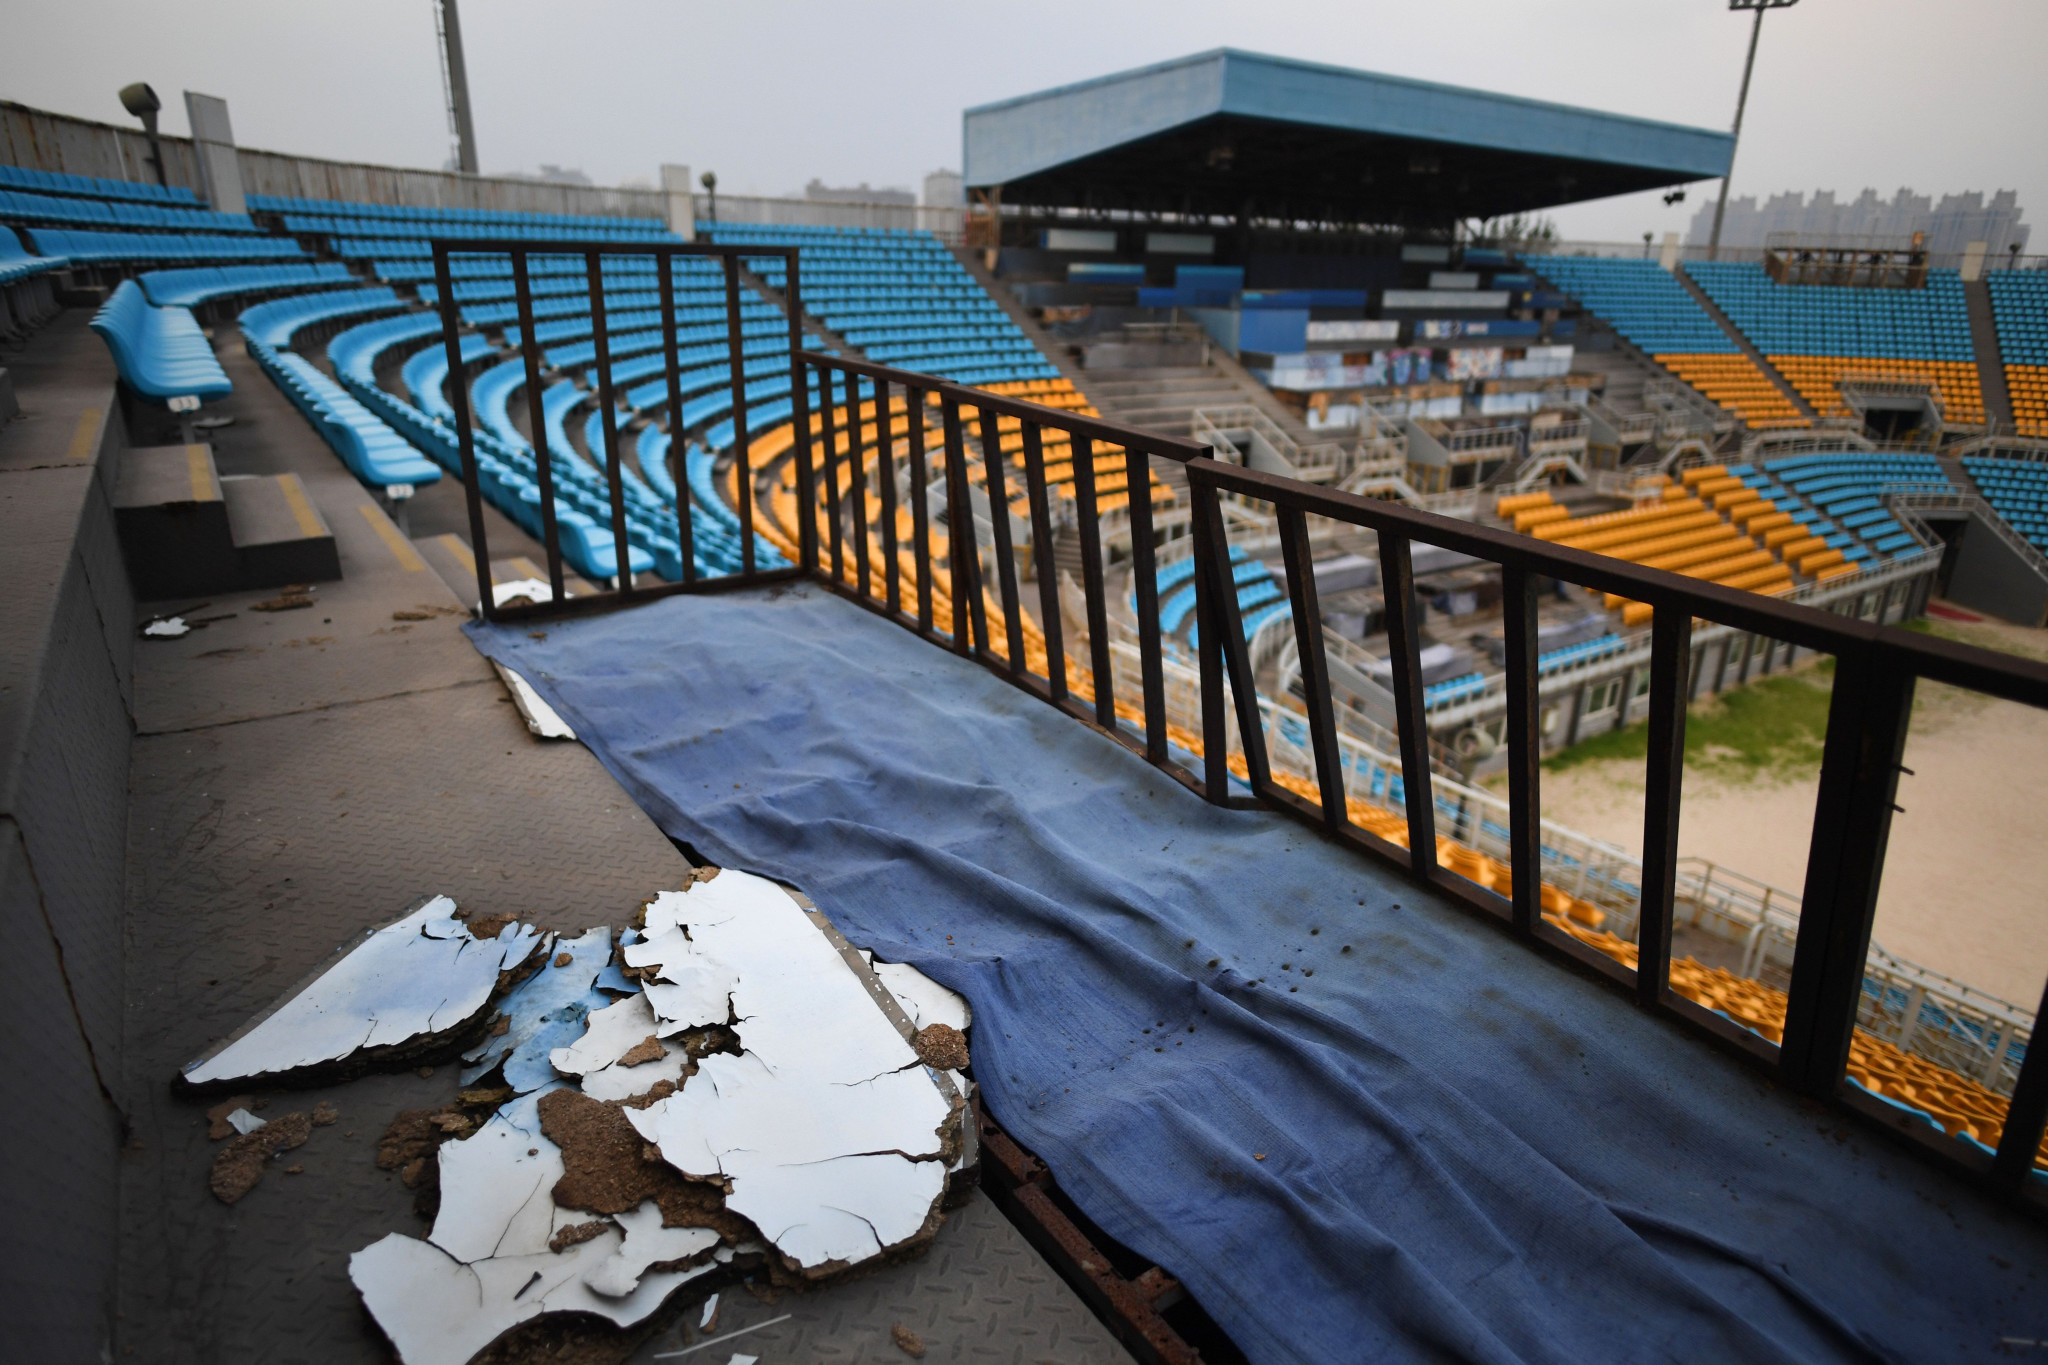 Pictures depicting decaying venues from the Beijing 2008 Games emerged last month ©Getty Images